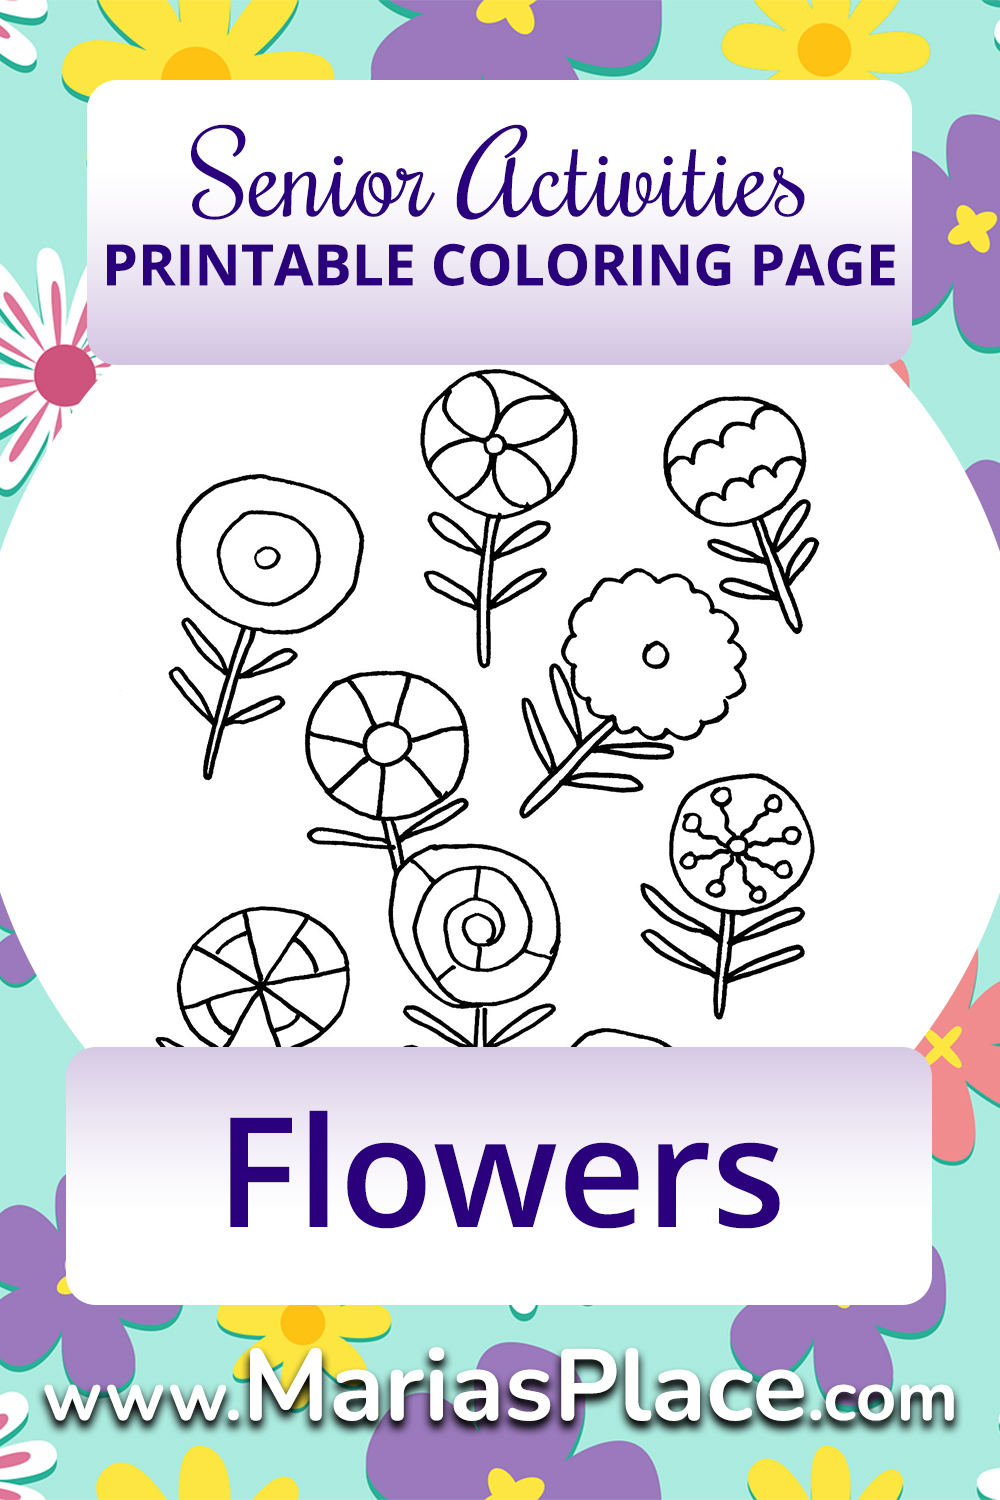 Coloring – Flowers